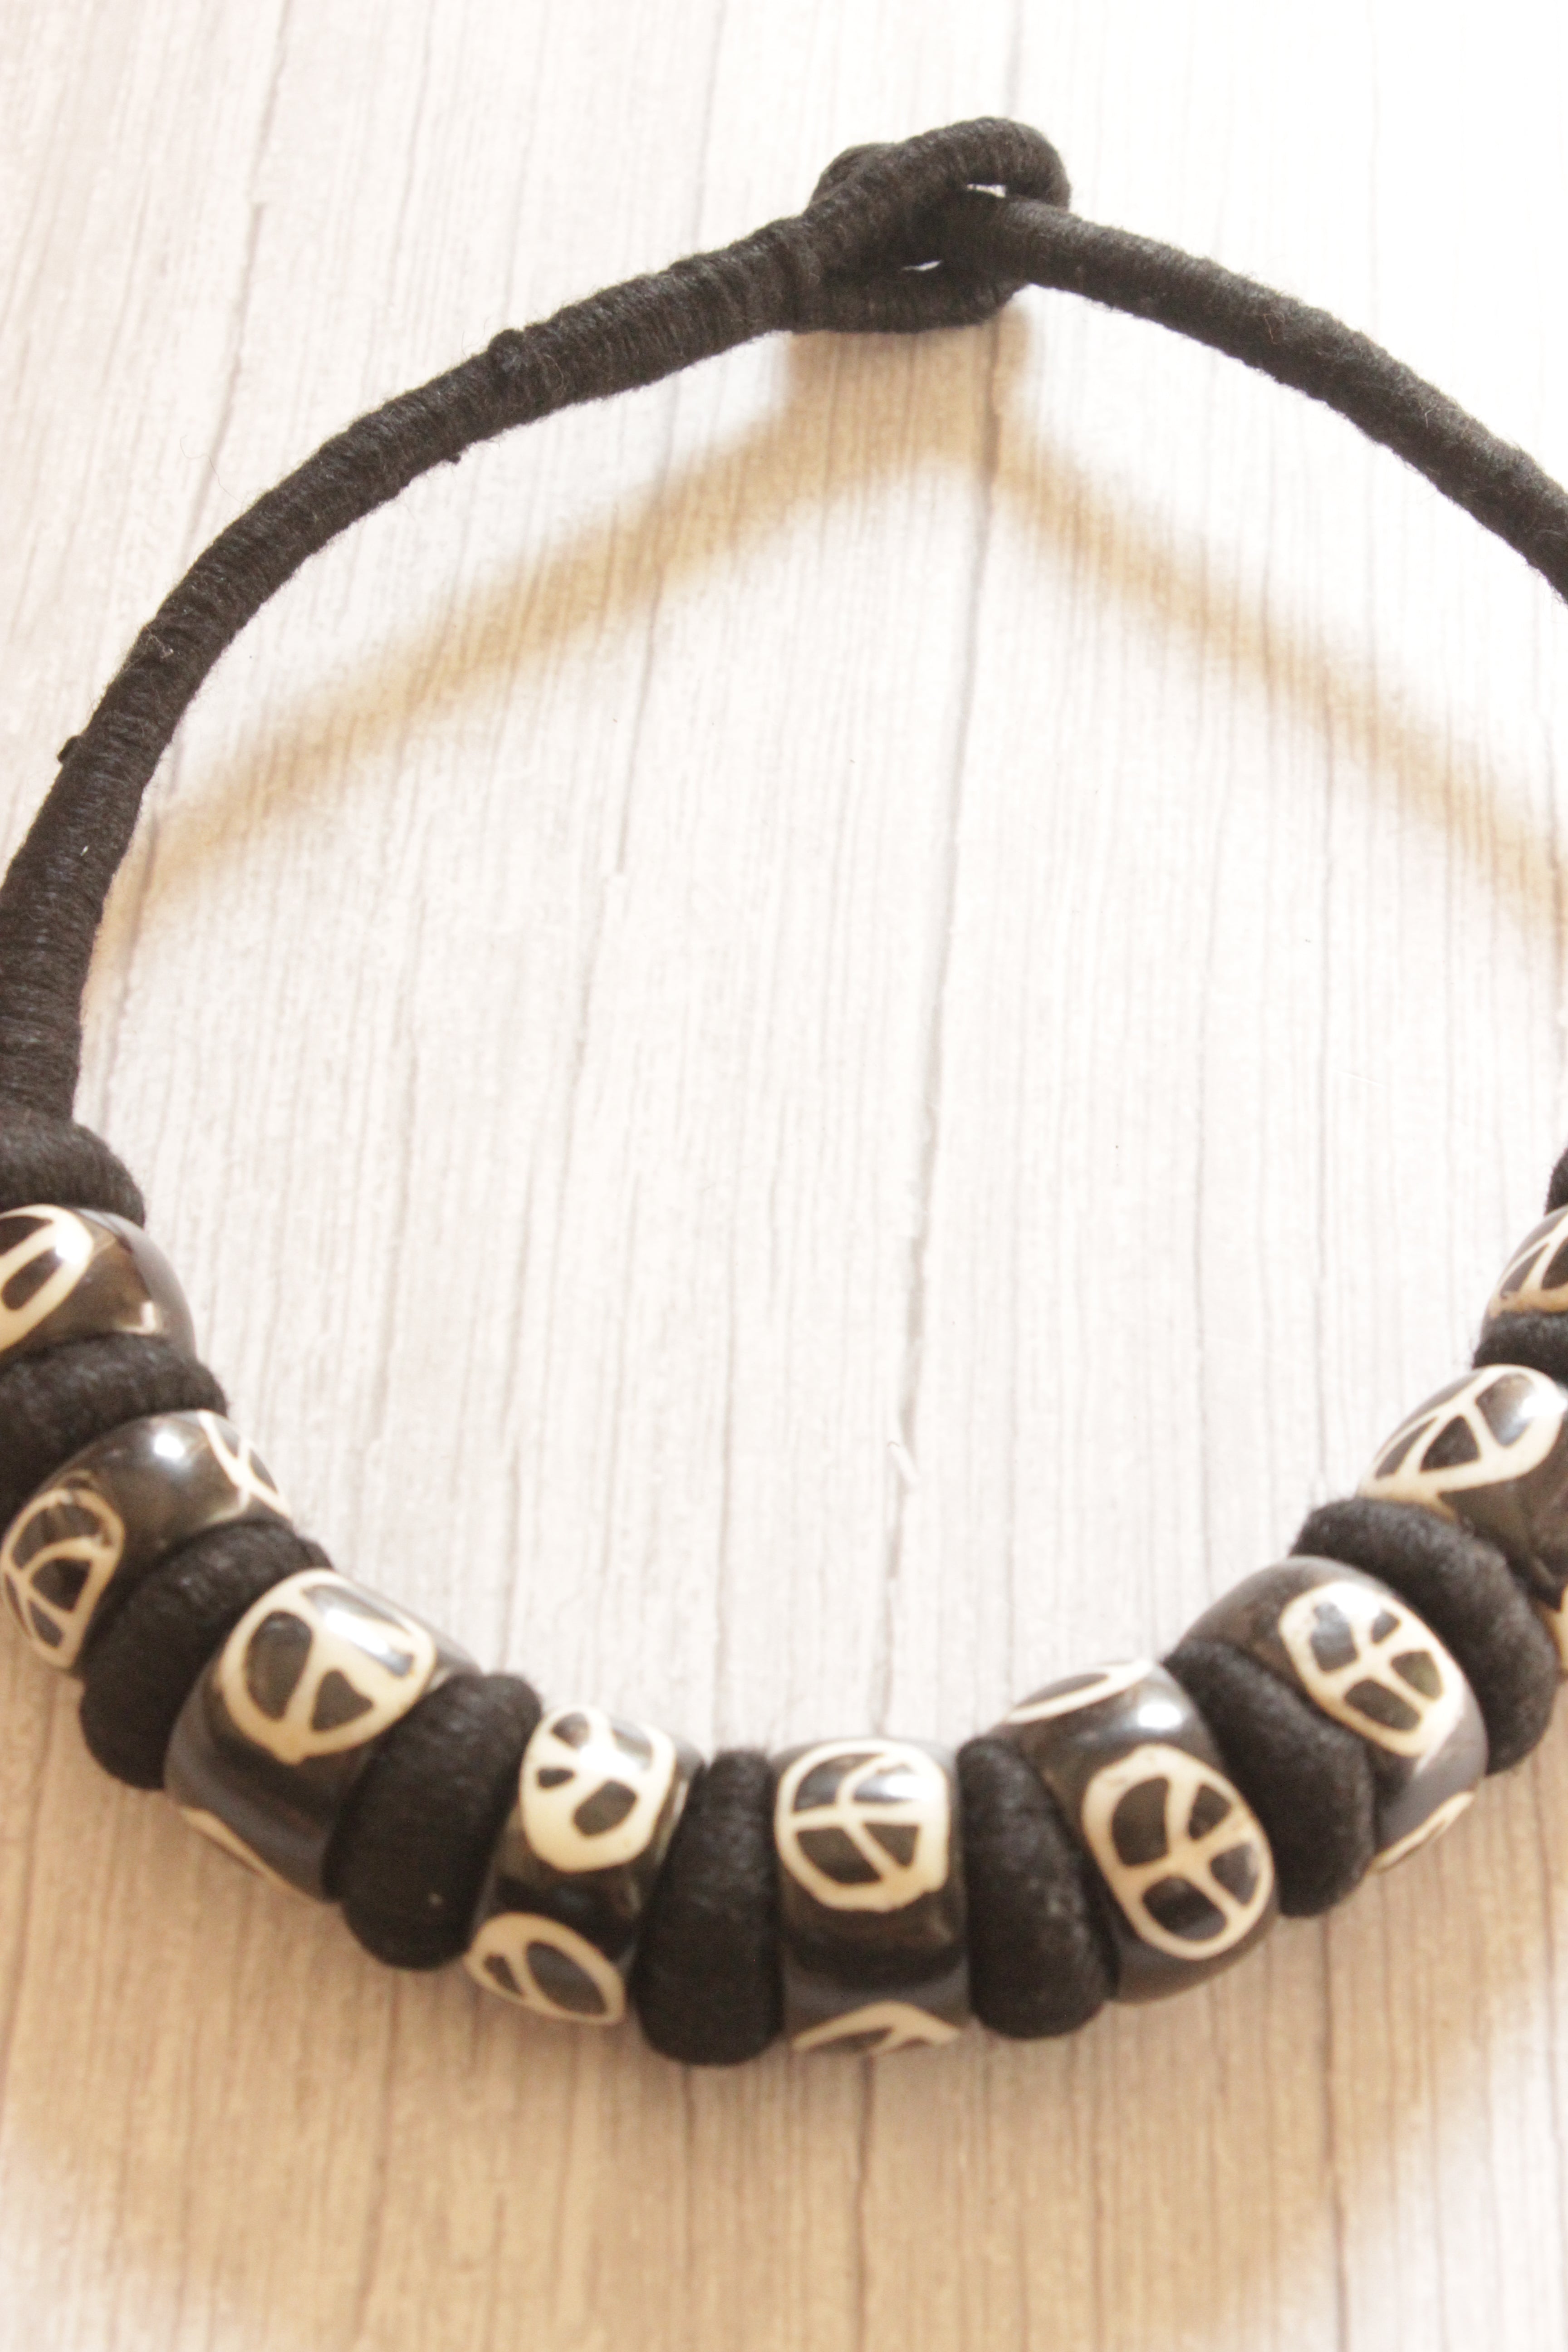 Engraved Wooden Beads Woven in a Rope Choker Necklace